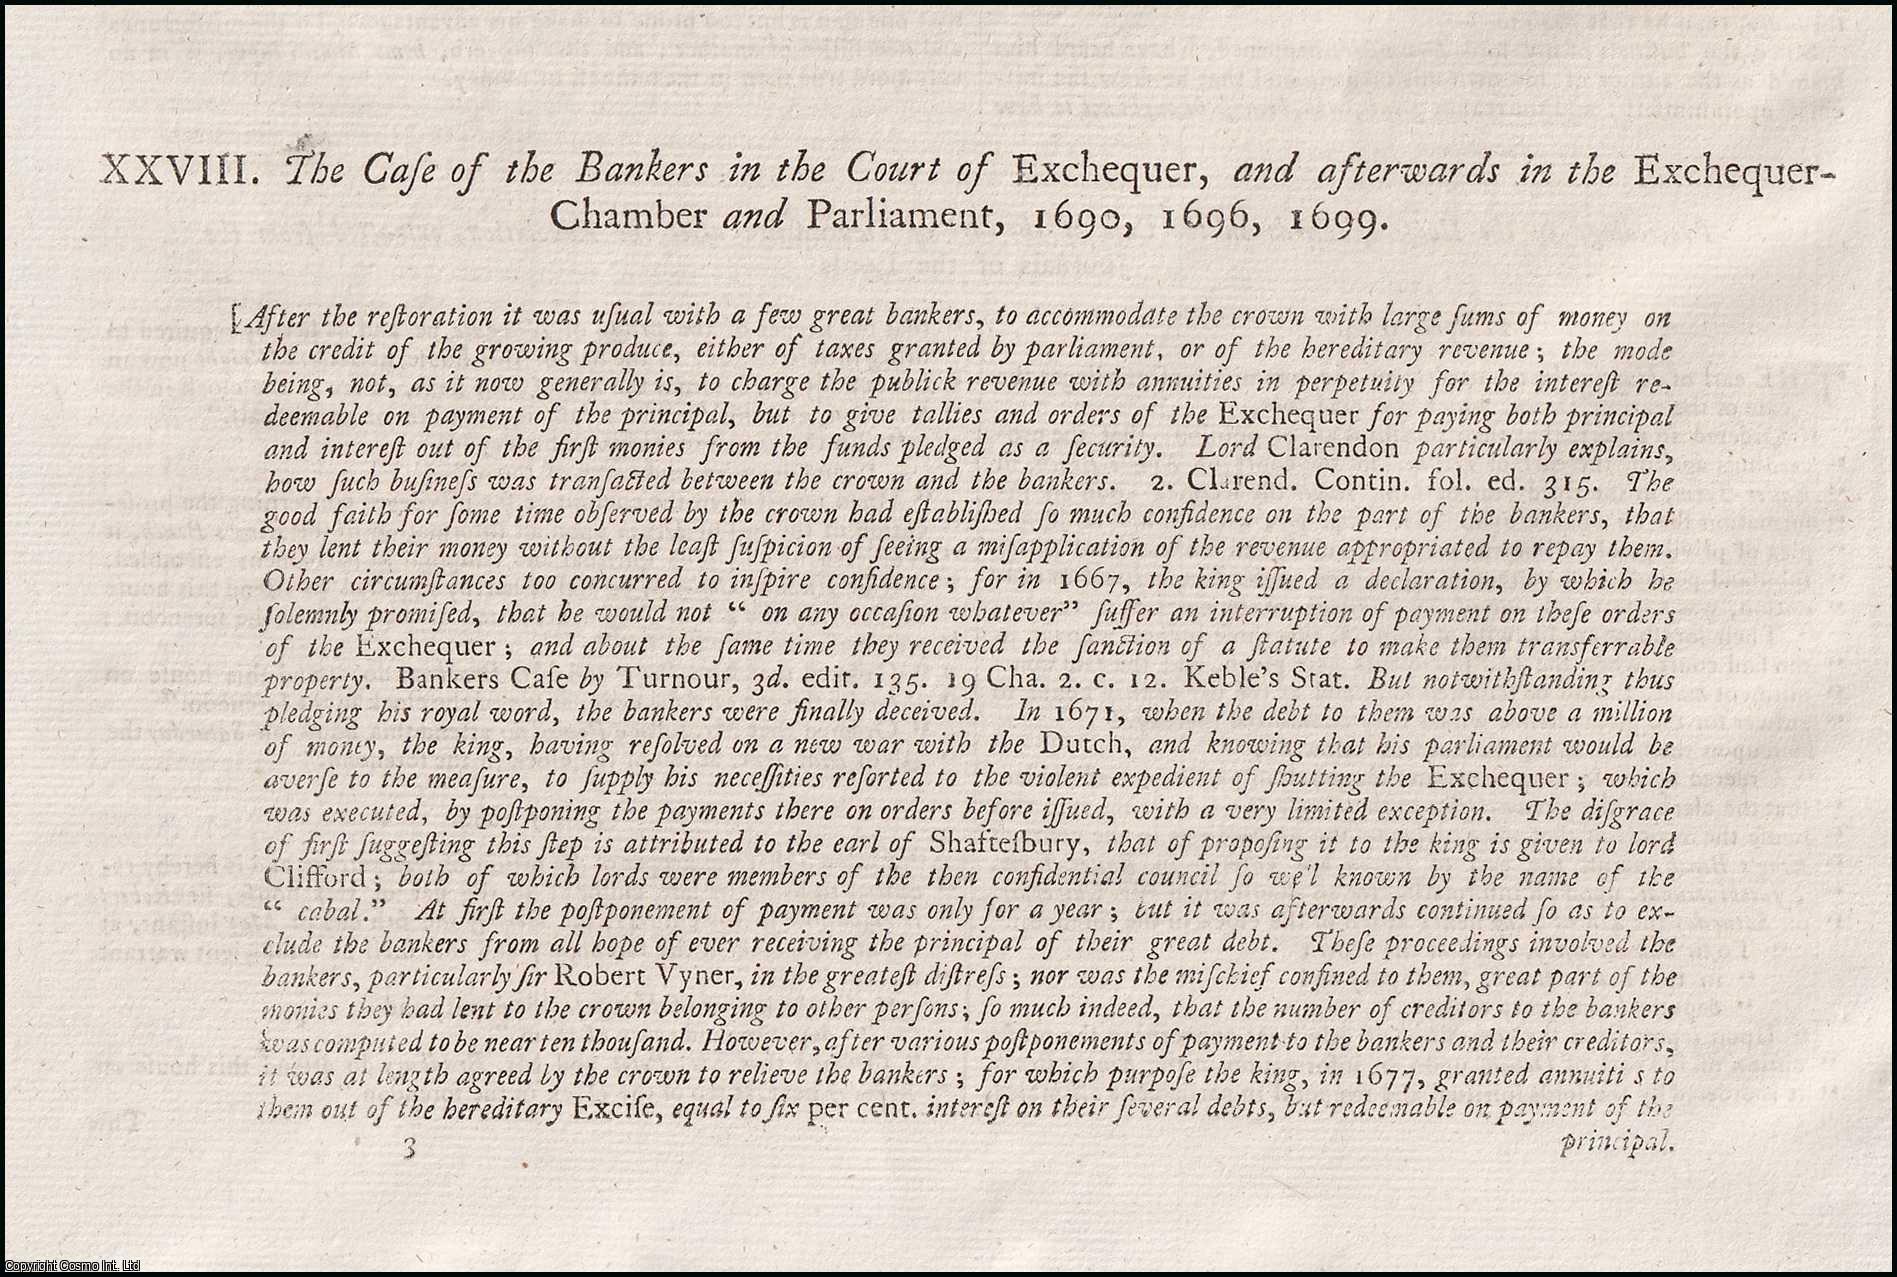 [Trial]. - The Case of the Bankers in the Court of Exchequer, and afterwards in the Exchequer-Chamber & Parliament, 1690,1696,1699. An original report from the Collected State Trials.